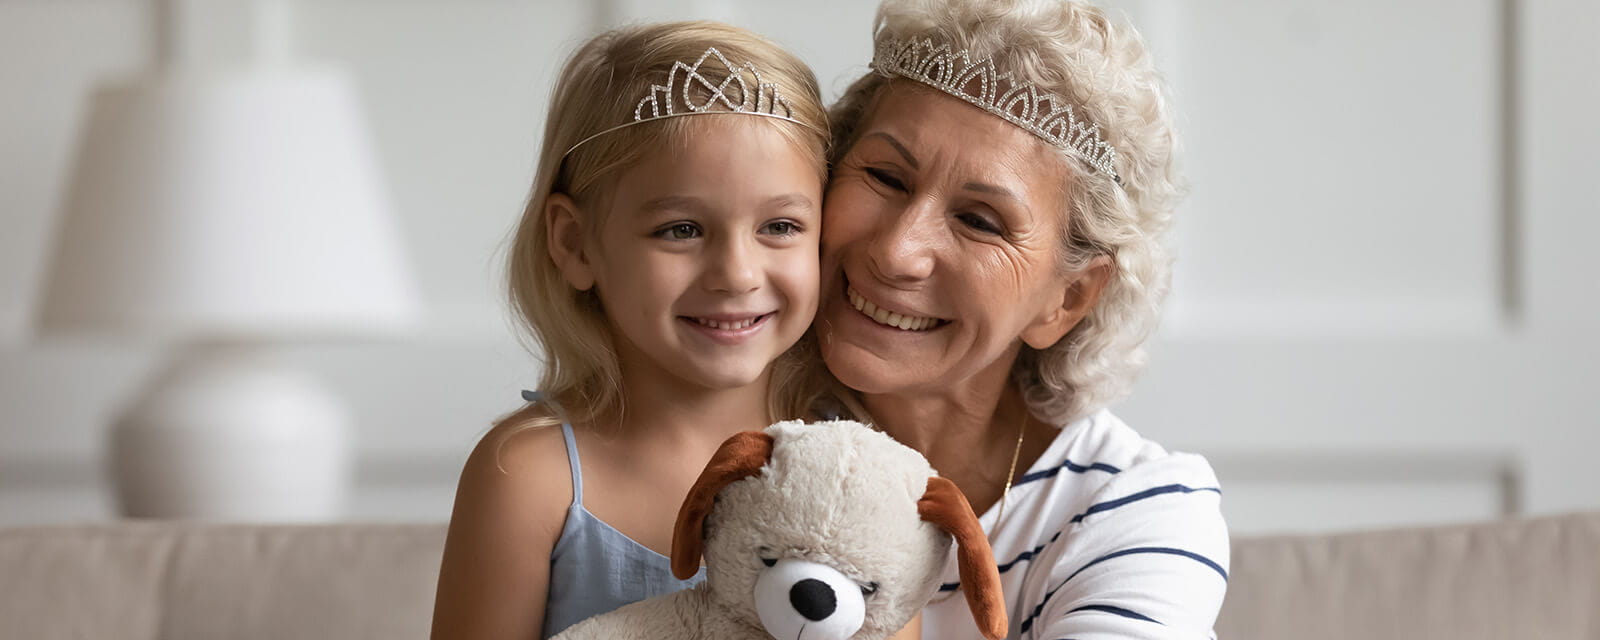 A grandmother and granddaughter in a happy embrace while wearing tiaras